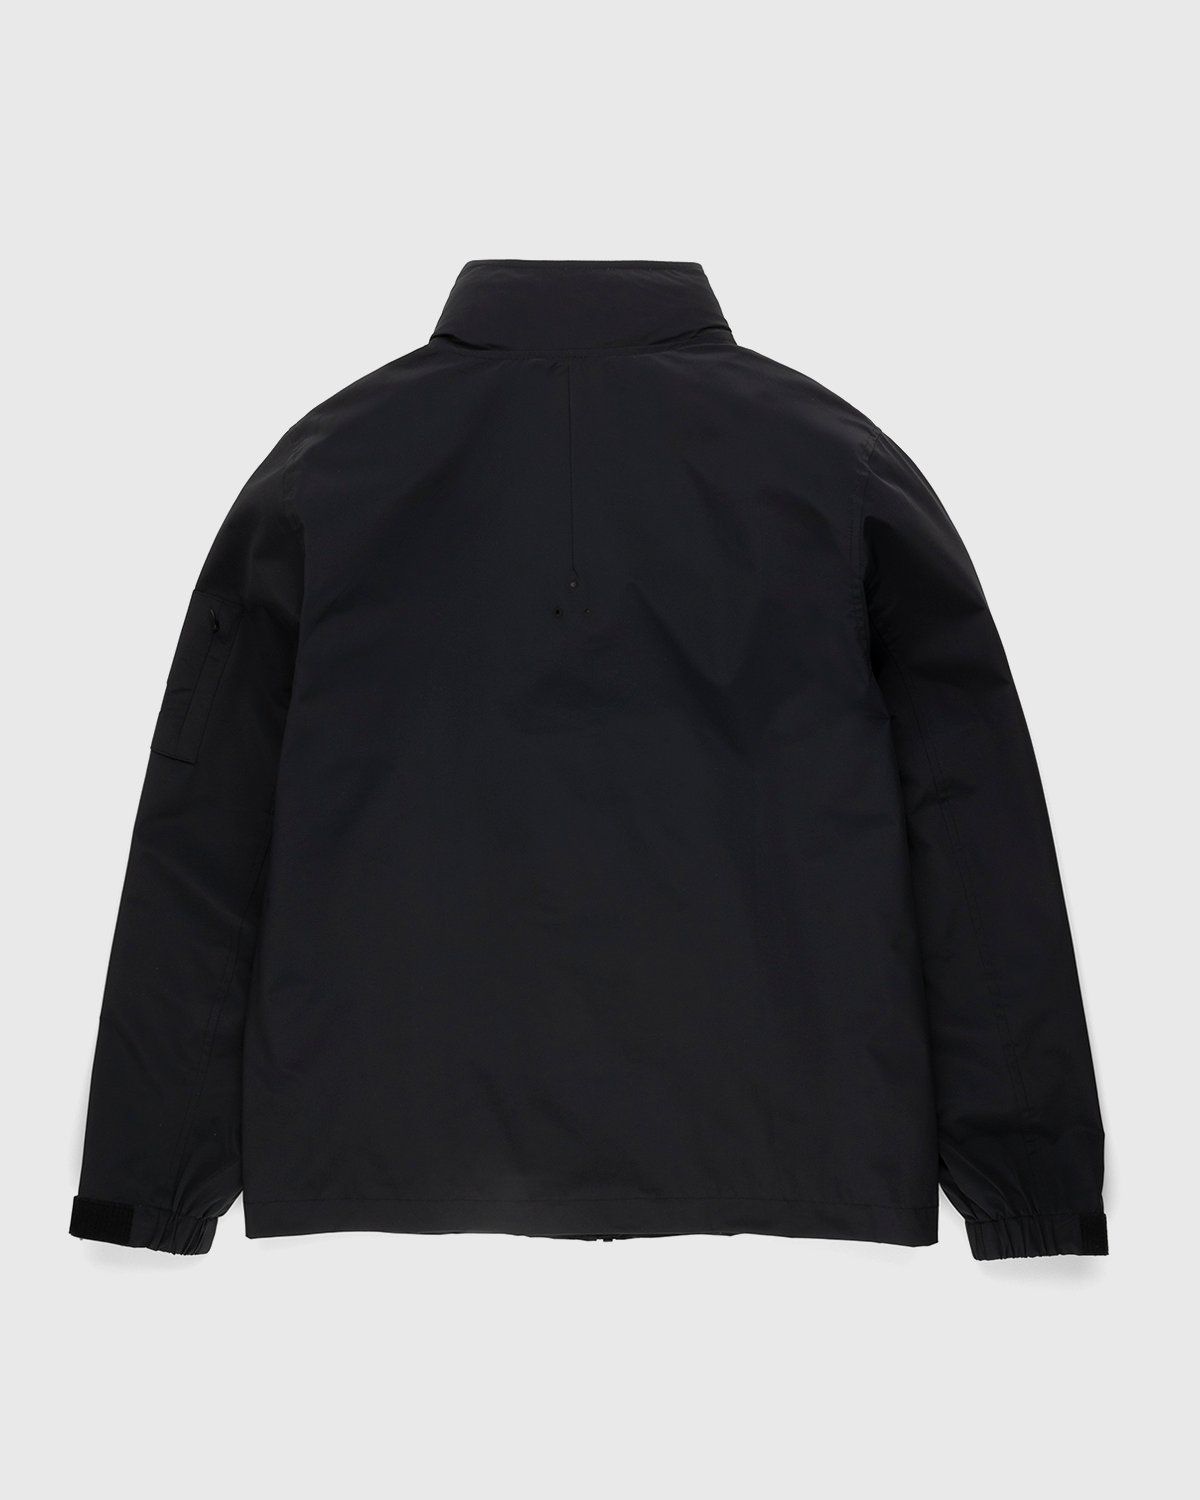 A-Cold-Wall* – Grasmoor Storm Jacket Black - Outerwear - Black - Image 2